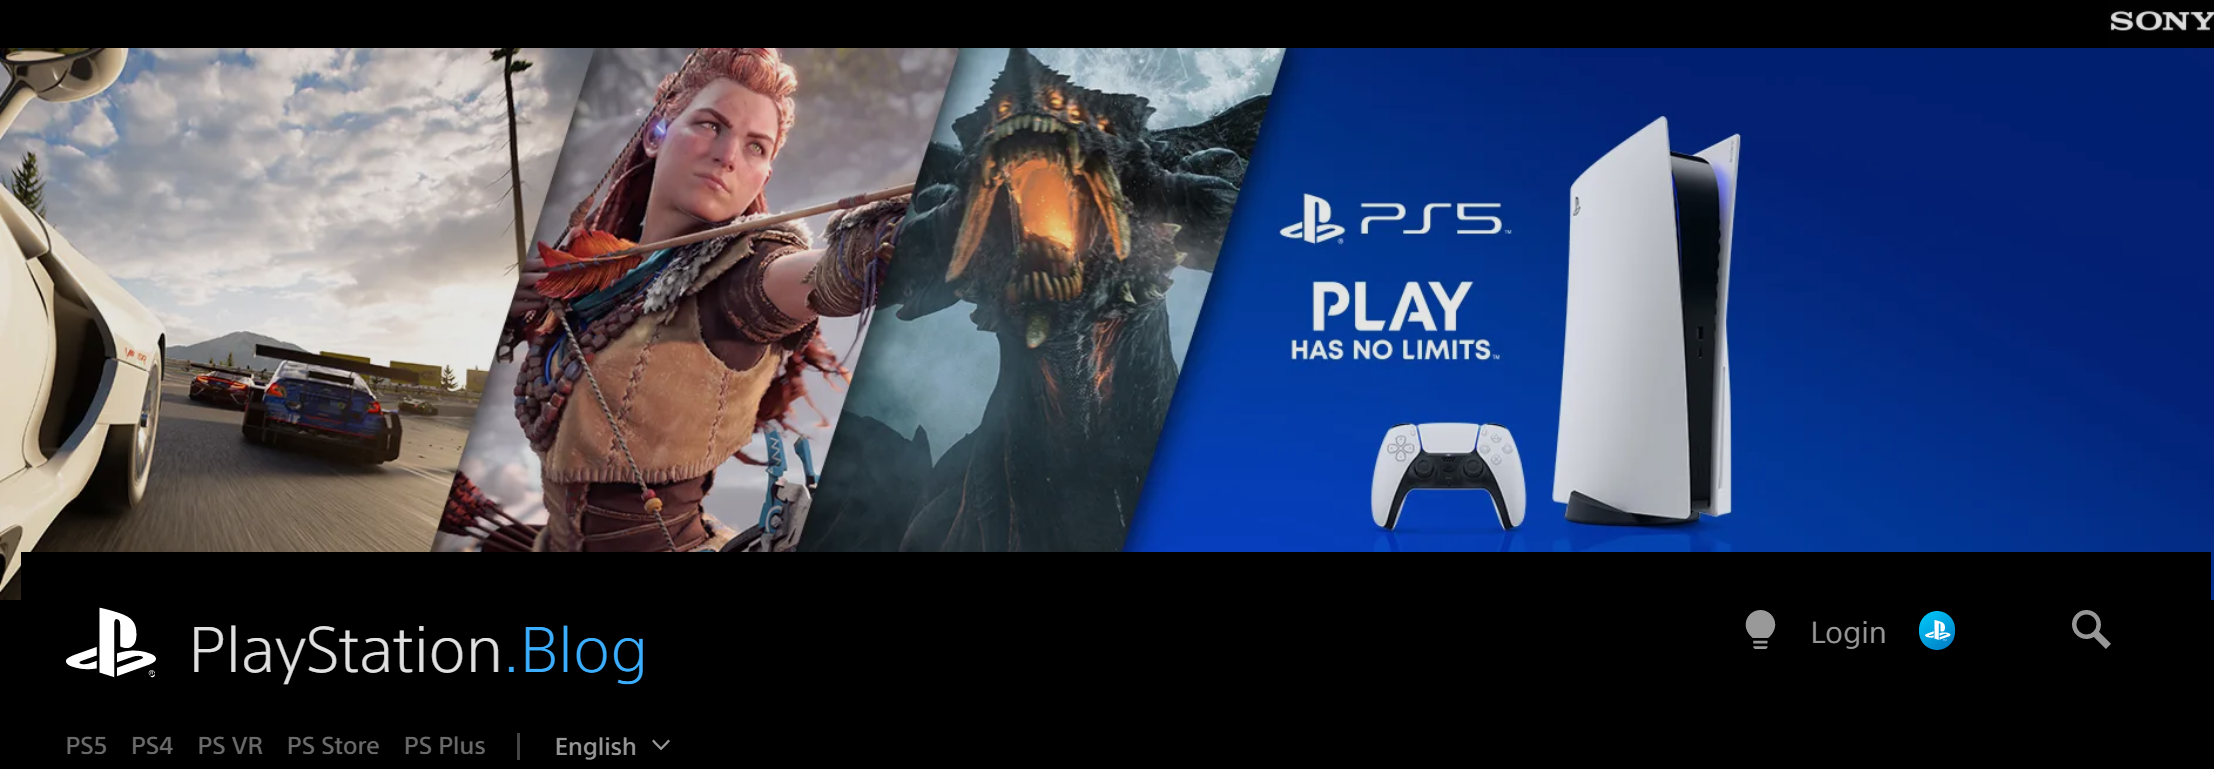 Play has ended. Sony PLAYSTATION 5 слоган. Ps5 Promo. PLAYSTATION Play has no limits. Ps5 баннер.